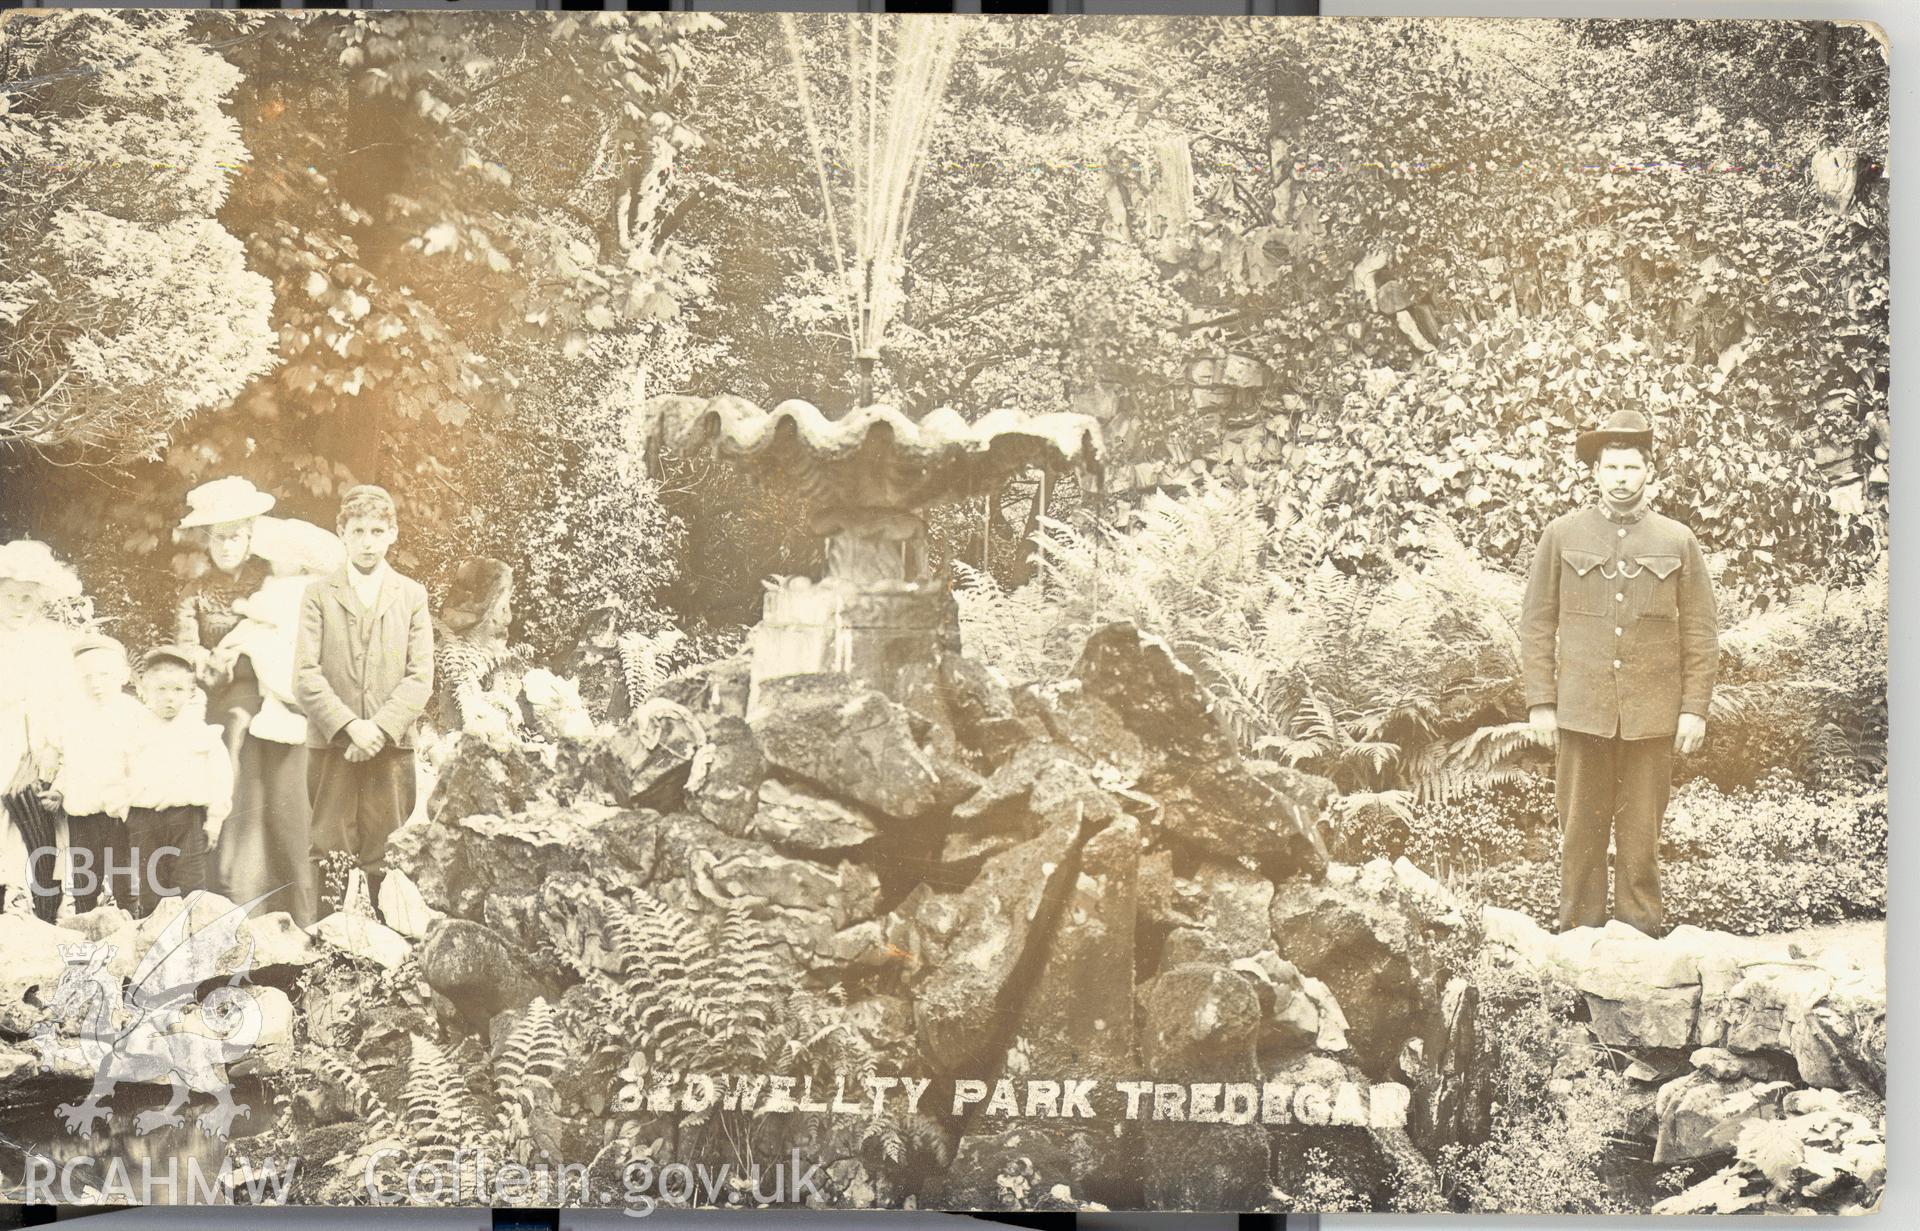 Digitised postcard image of the Grotto, Bedwellty Park, Tredegar. Produced by Parks and Gardens Data Services, from an original item in the Peter Davis Collection at Parks and Gardens UK. We hold only web-resolution images of this collection, suitable for viewing on screen and for research purposes only. We do not hold the original images, or publication quality scans.